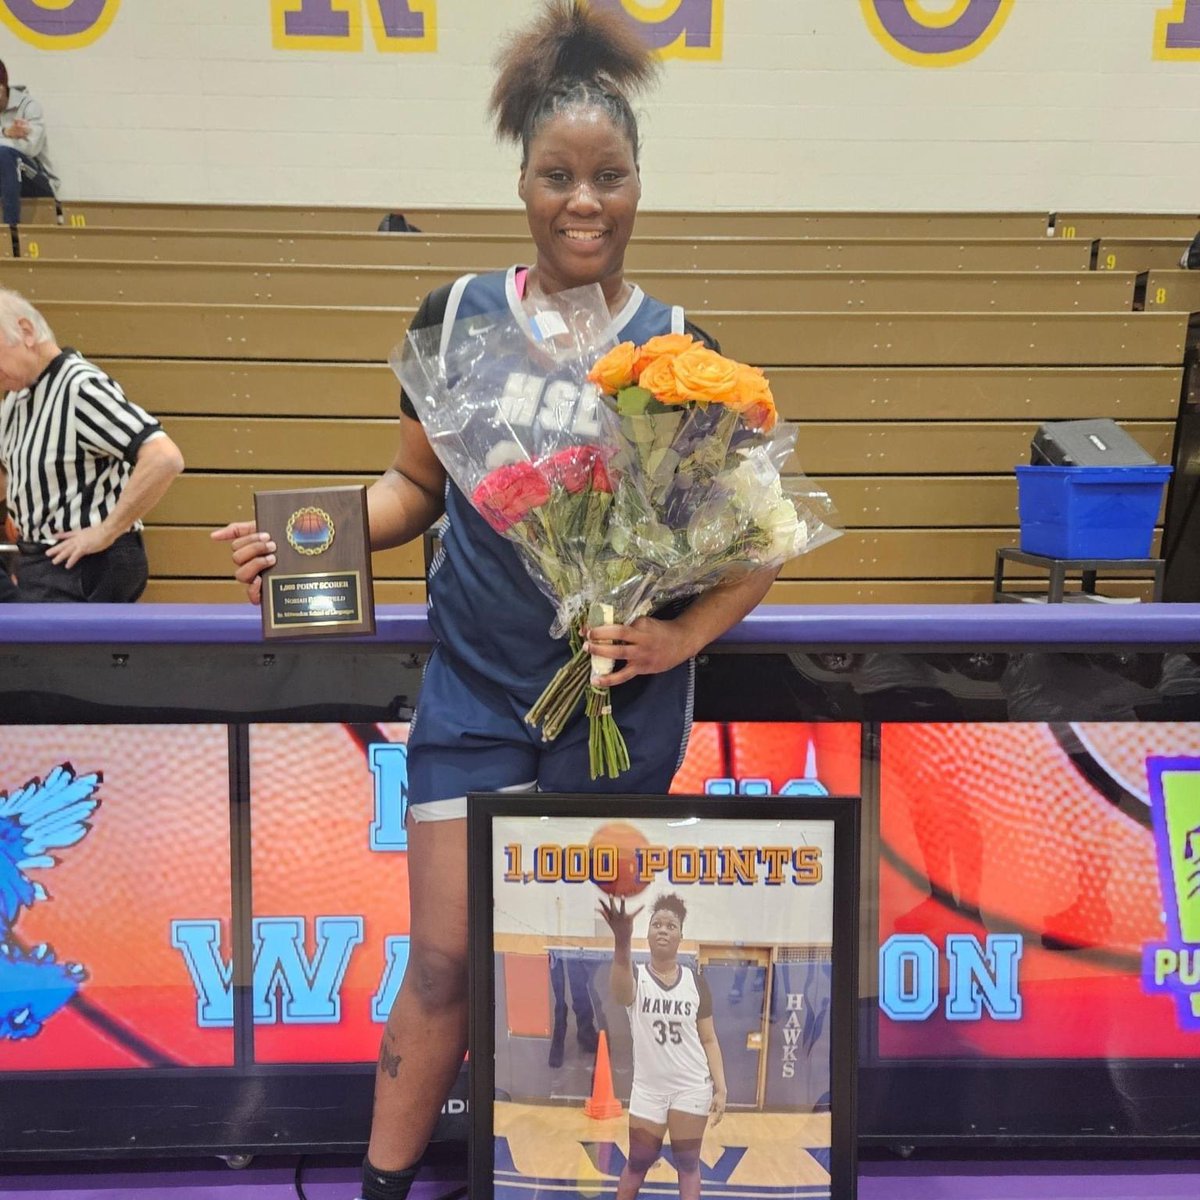 Congratulations to Milwaukee School of Languages senior Norriah Broomfield who hit the 1,000 point milestone recently! #PGE4Life #TheFuturePlaysHere